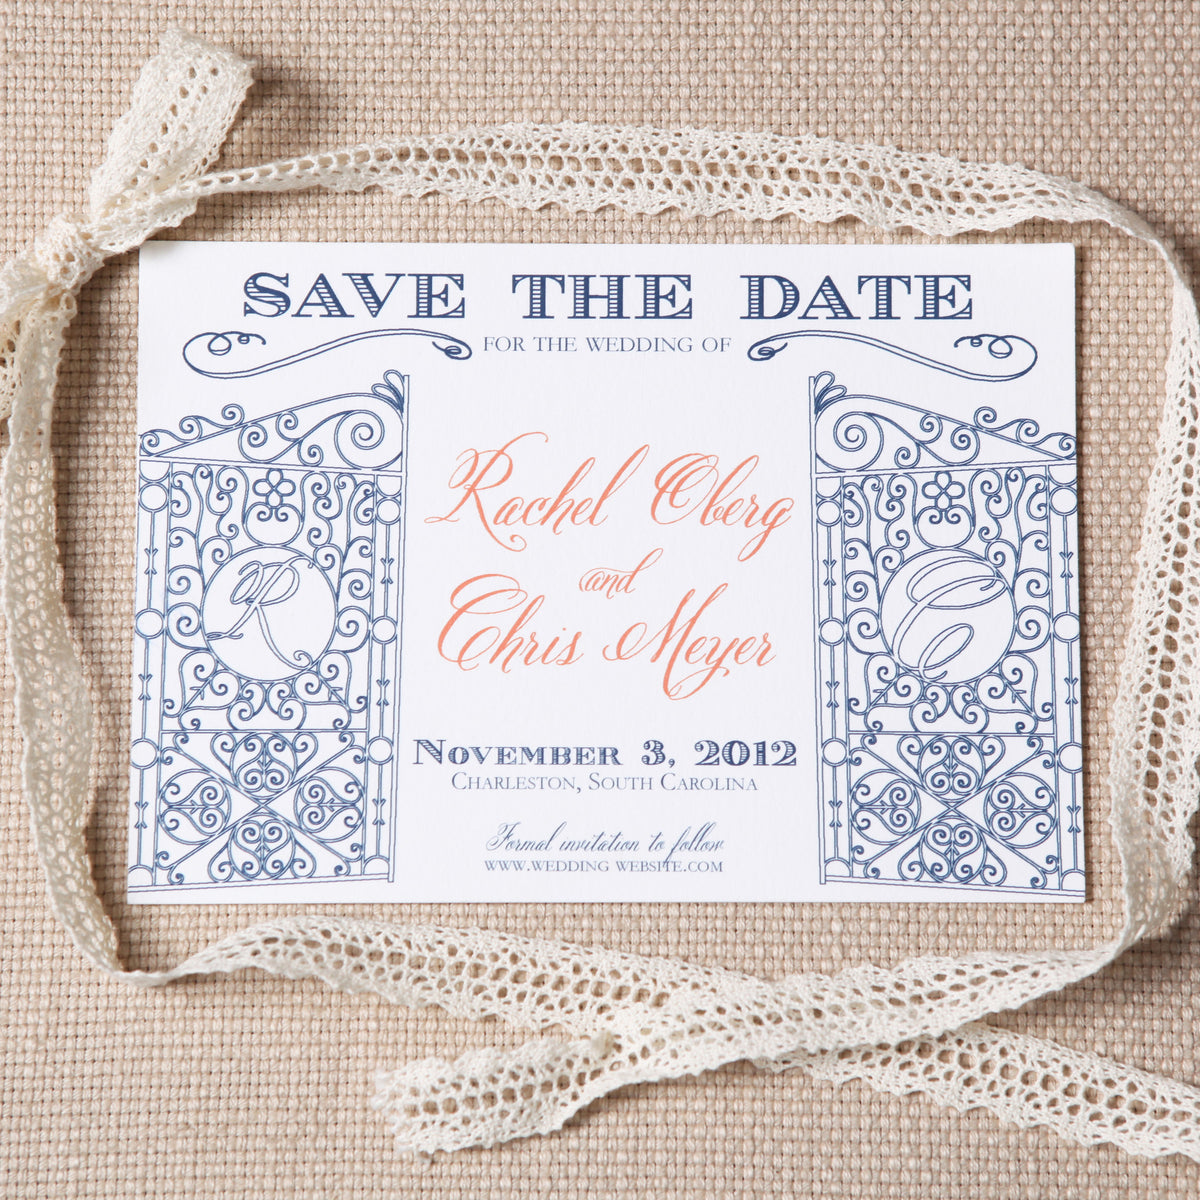 Legare Waring House Save the Date by Scotti Cline Designs - photo by Jennifer Bearden Photography